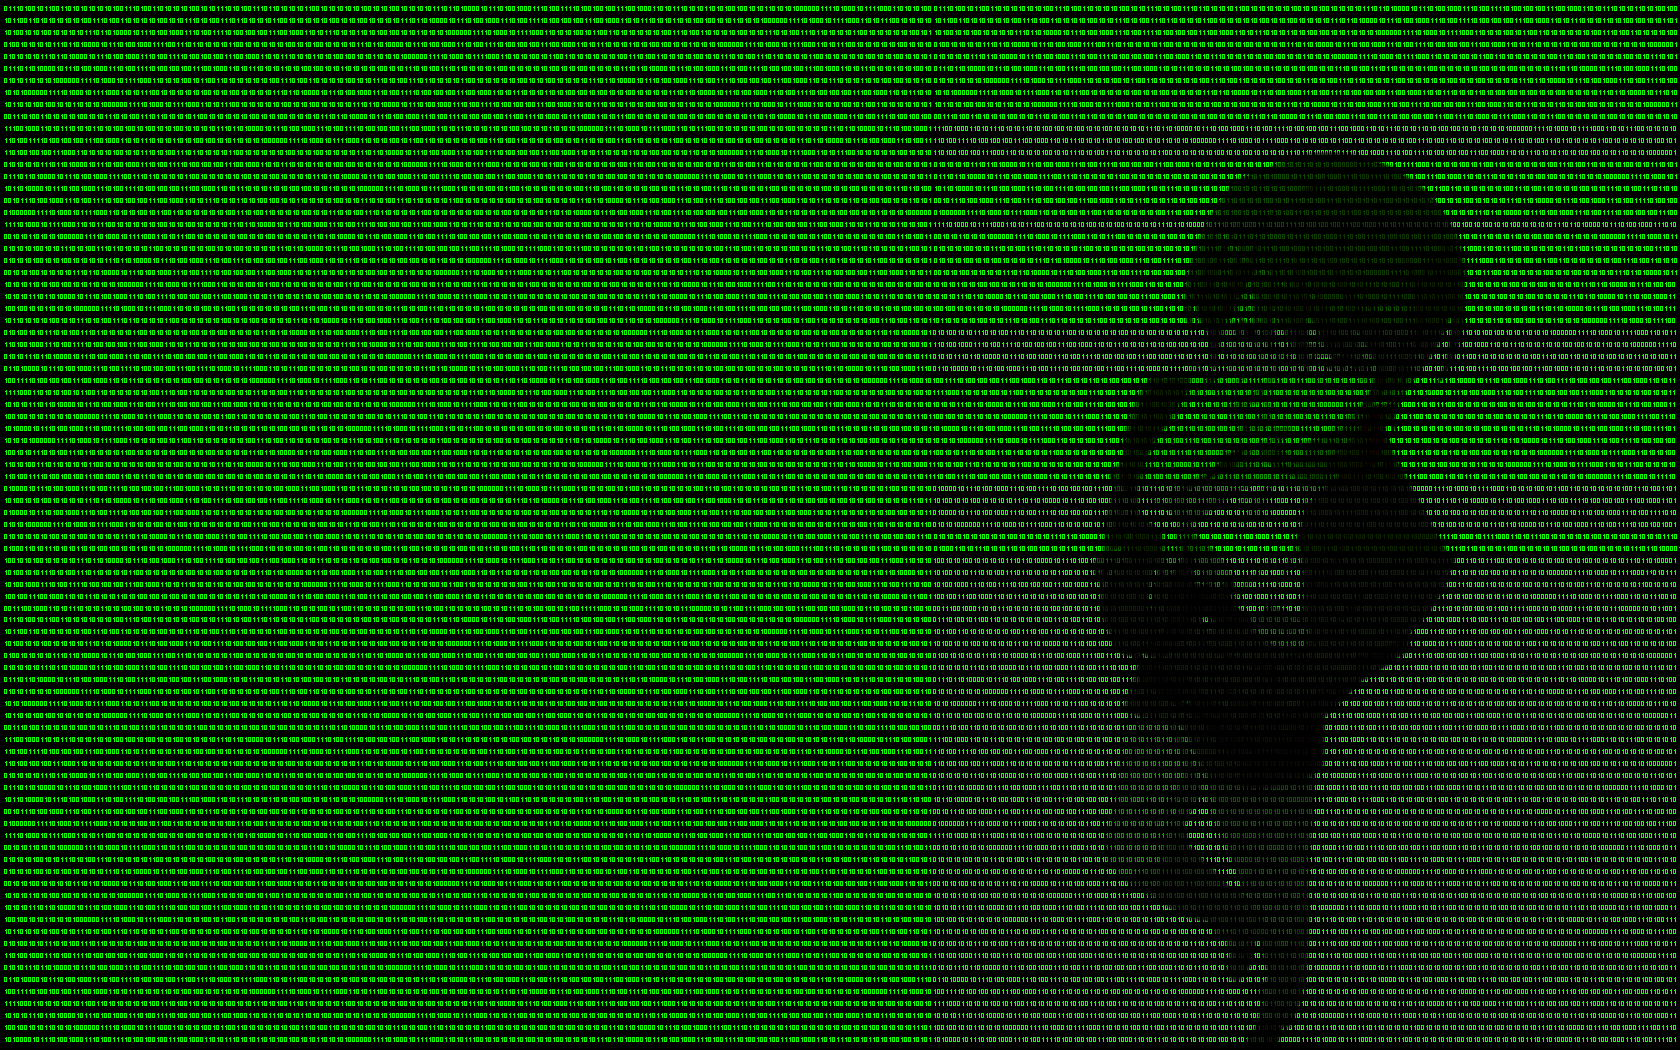 Binary The Wallpaper World God Only Knows